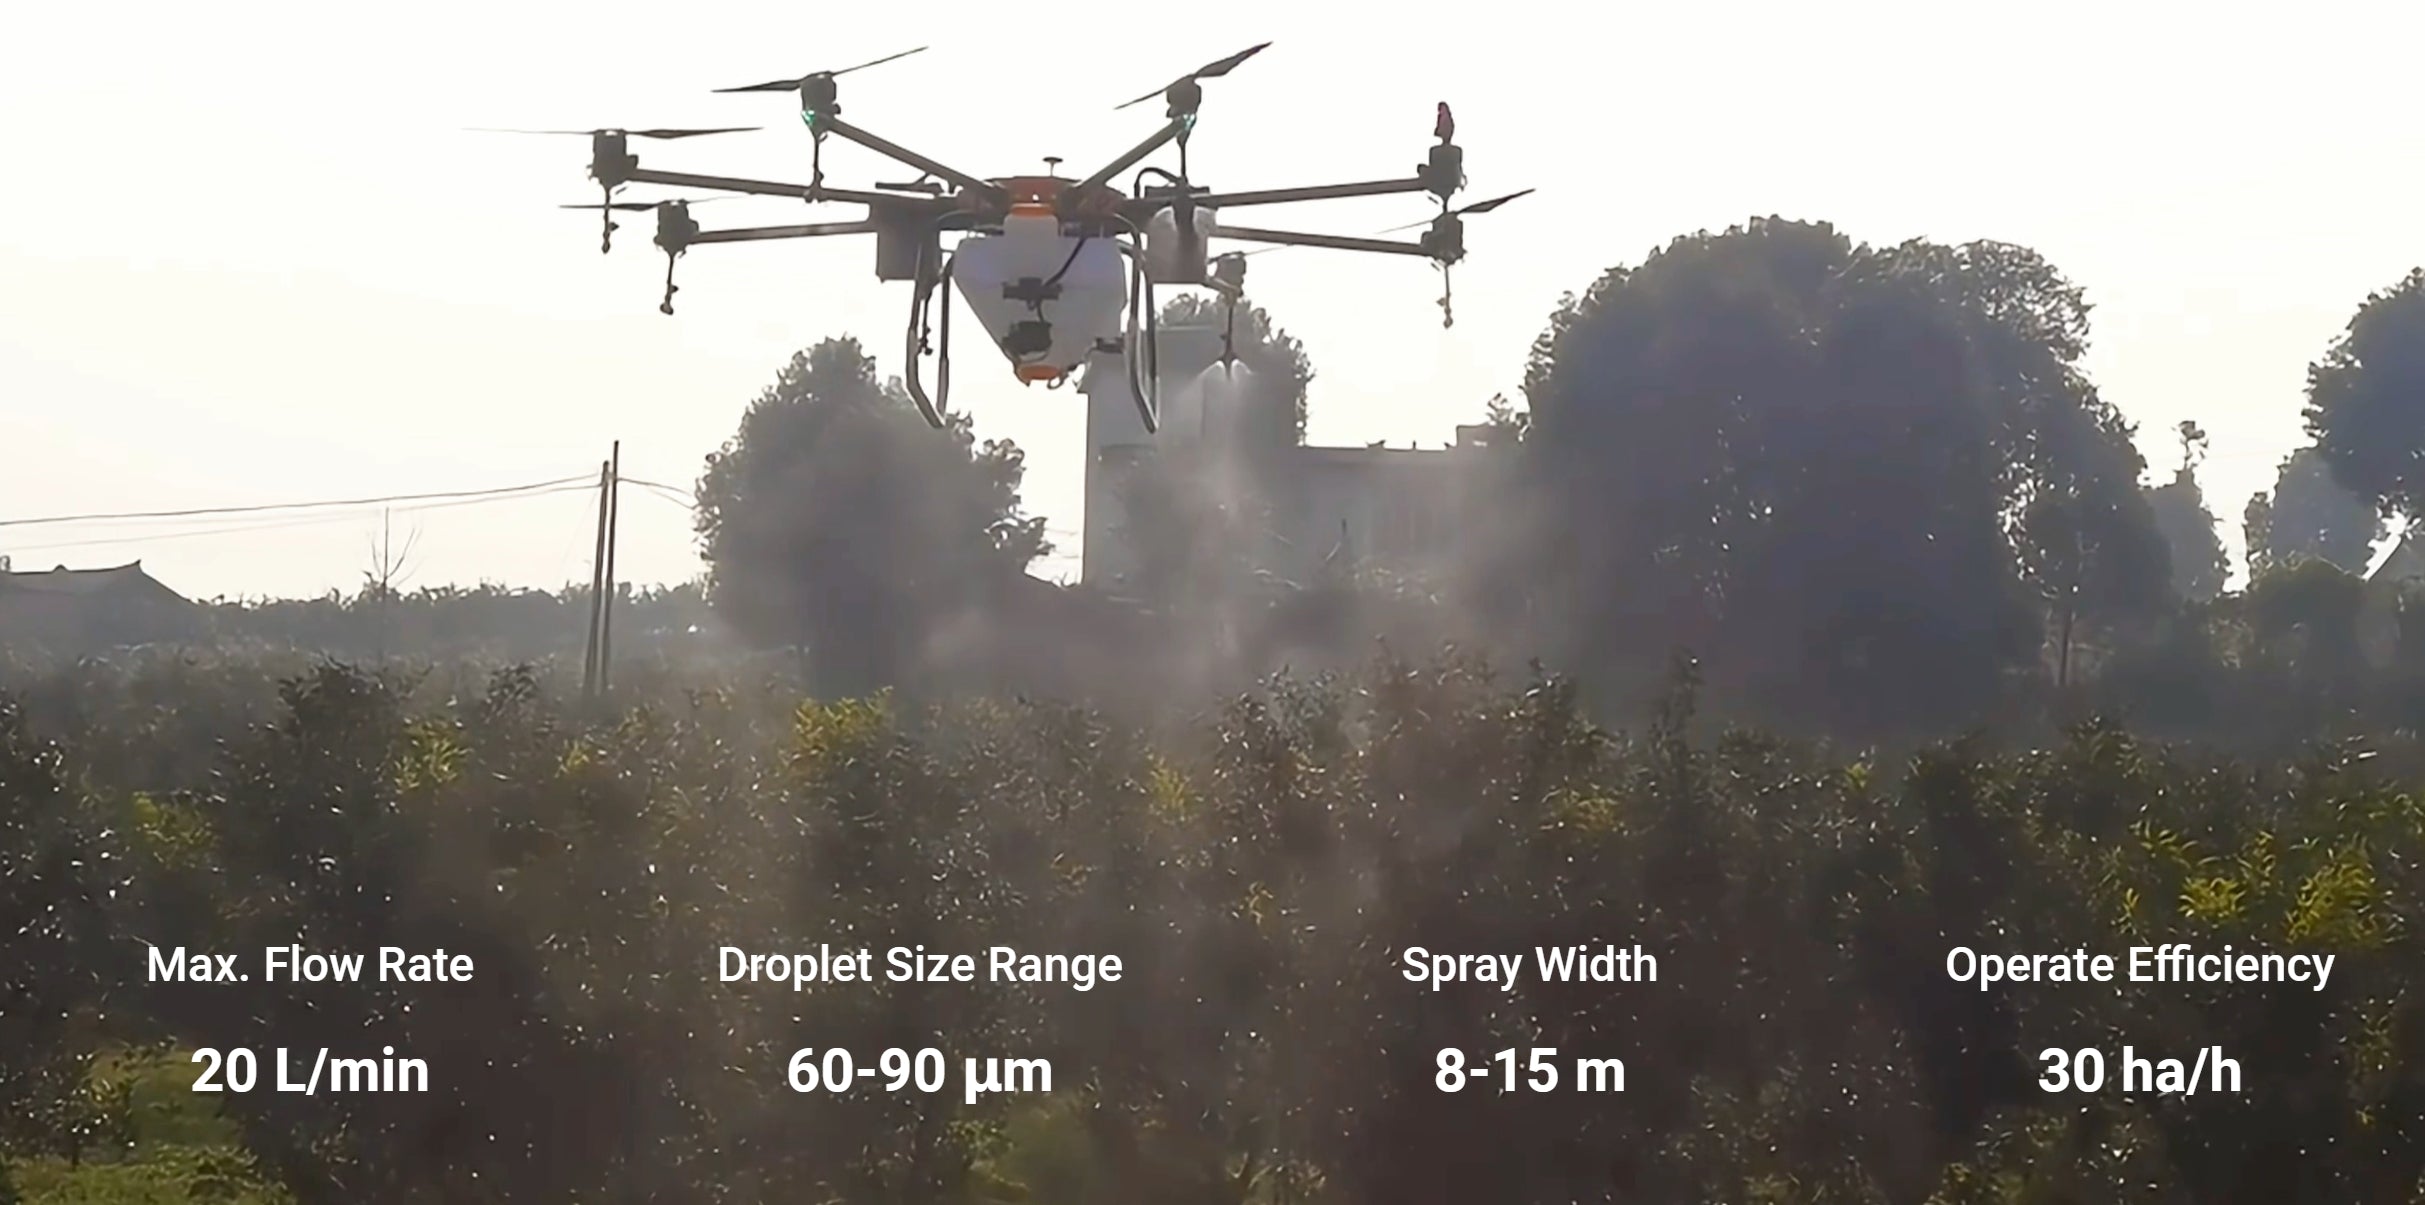 H160 Agricultural Drone, Max Flow Rate Droplet Size Range Spray Width Operate Efficiency 20 Ll